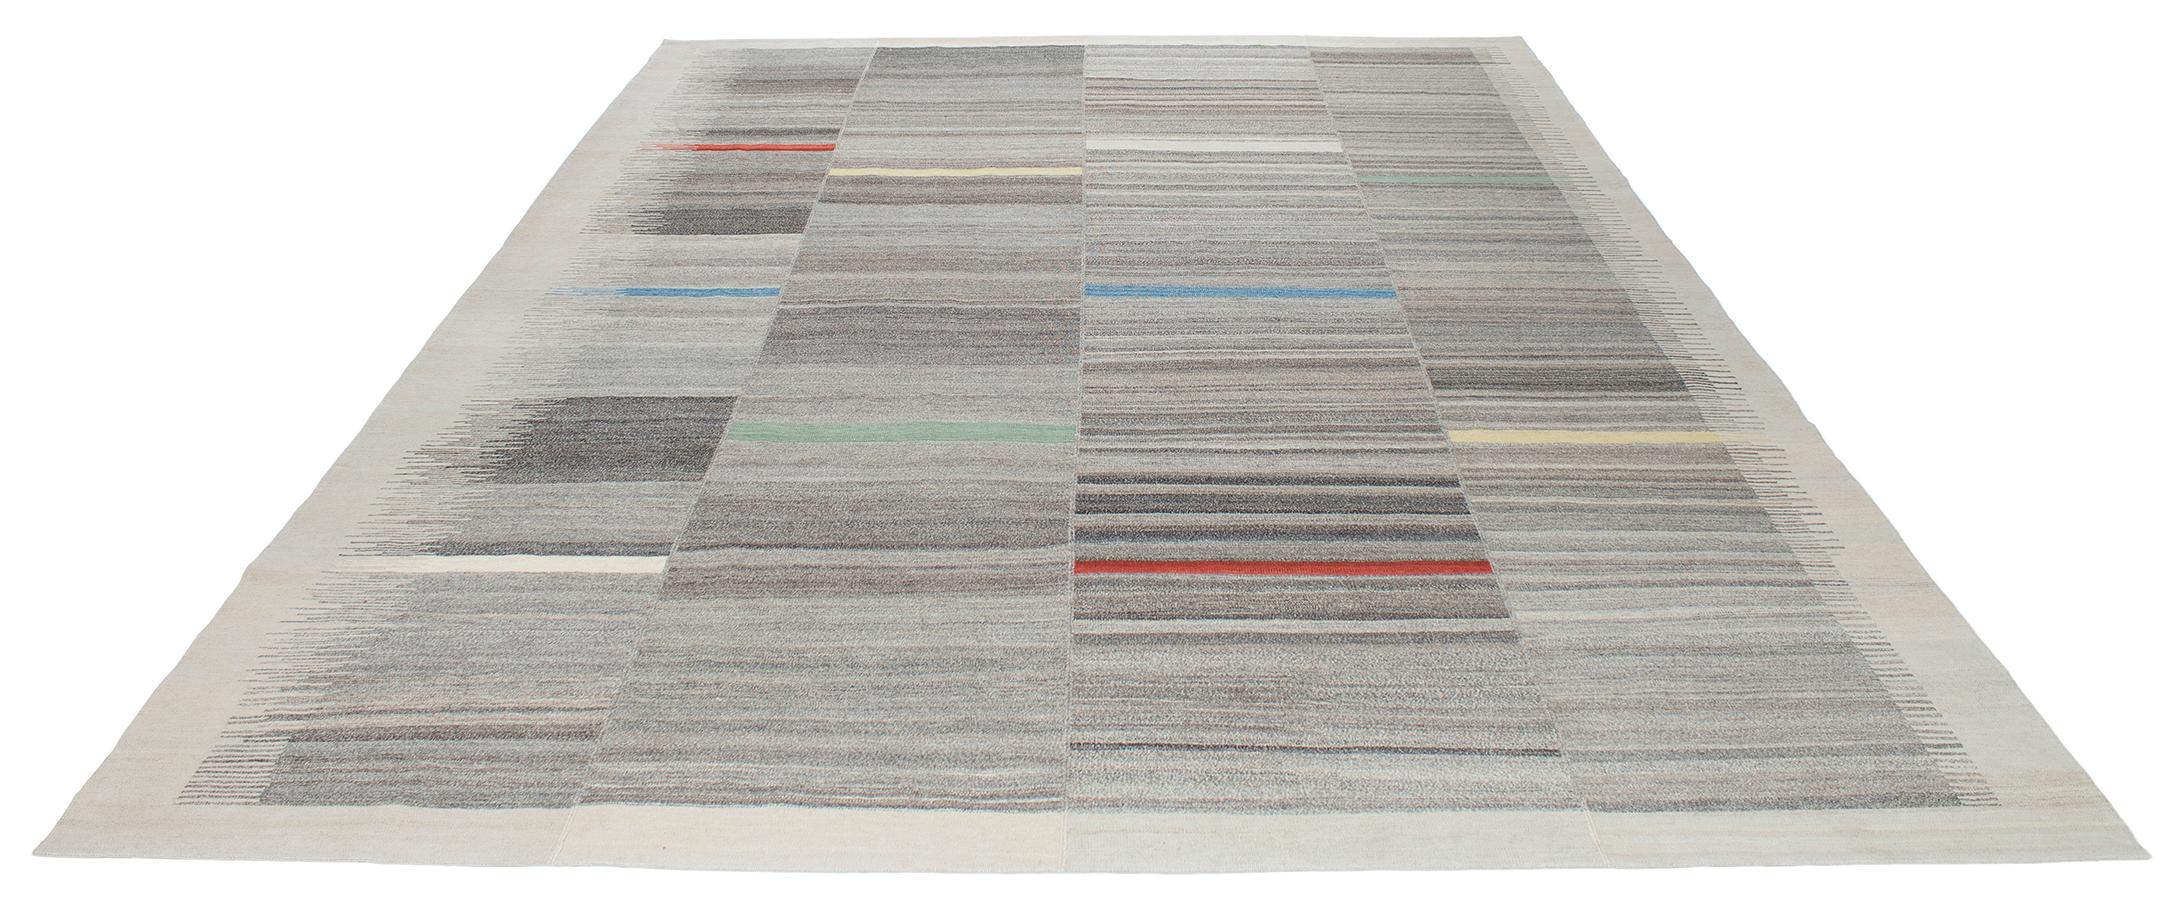 Afghan Modern Mazandaran Style Handwoven Flat-Weave Rug in Natural with Multi-Colors For Sale